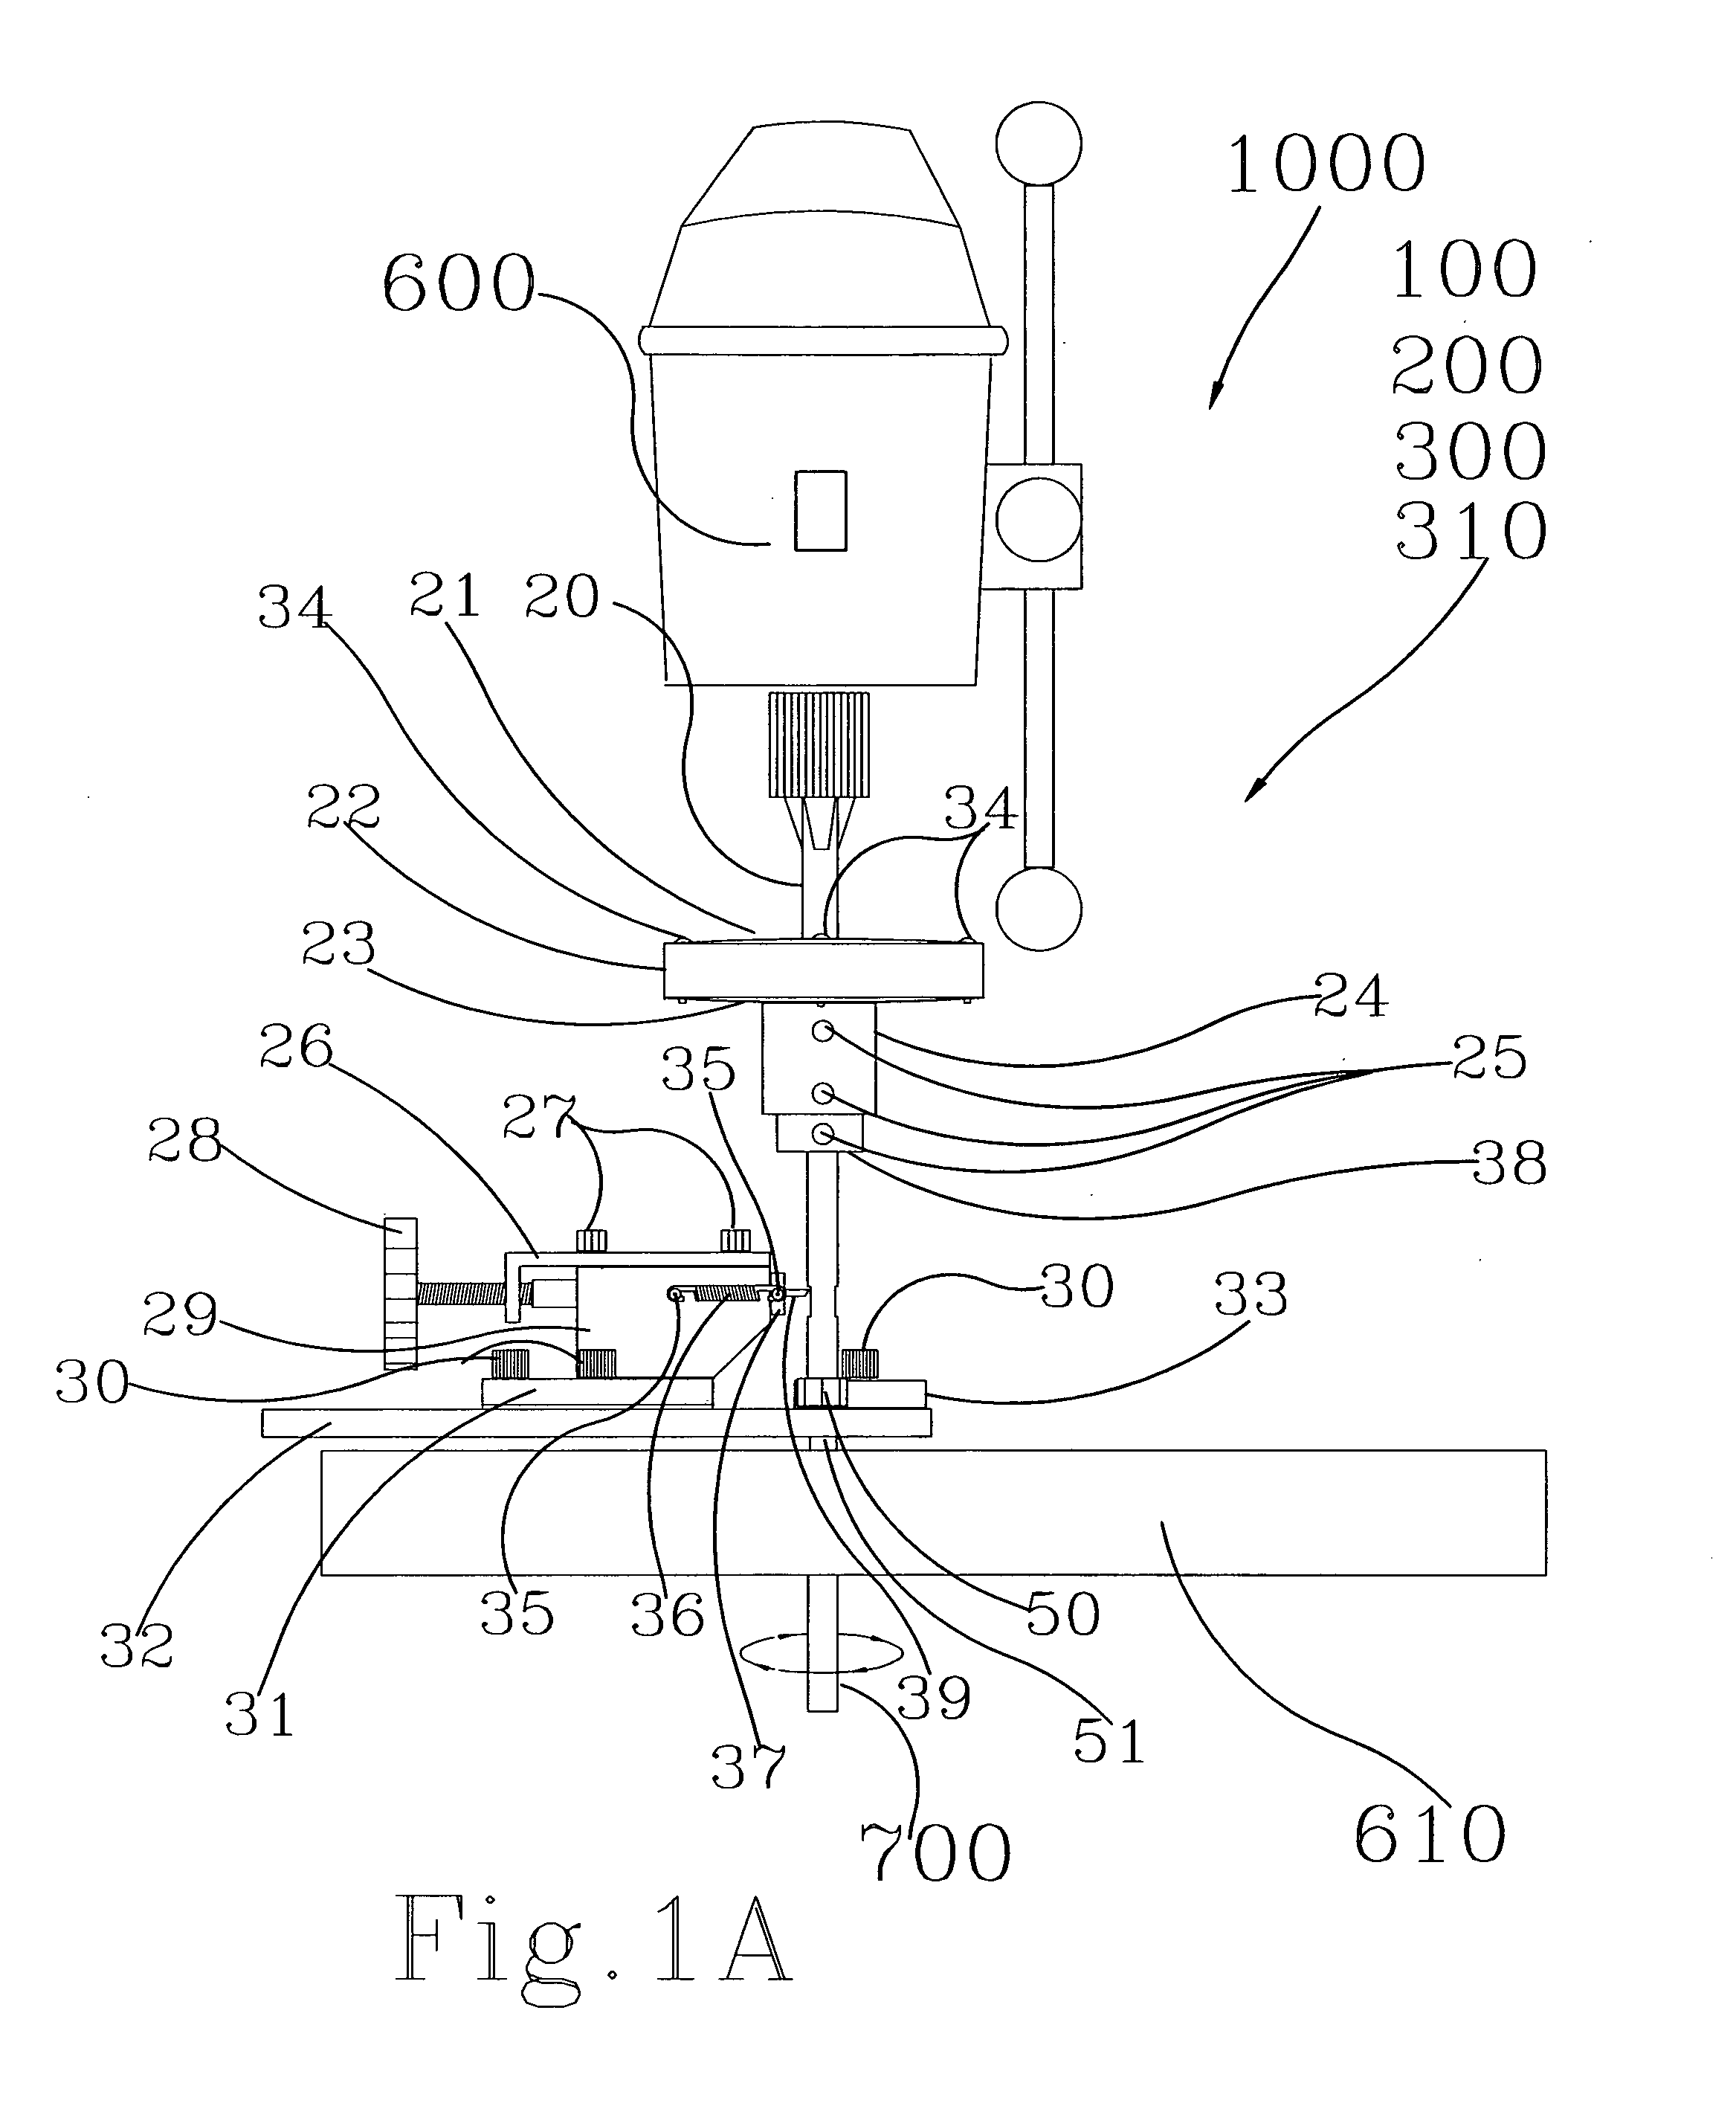 Metal lathe, core drill adaptor and rate of cut device for use with a standard drill press